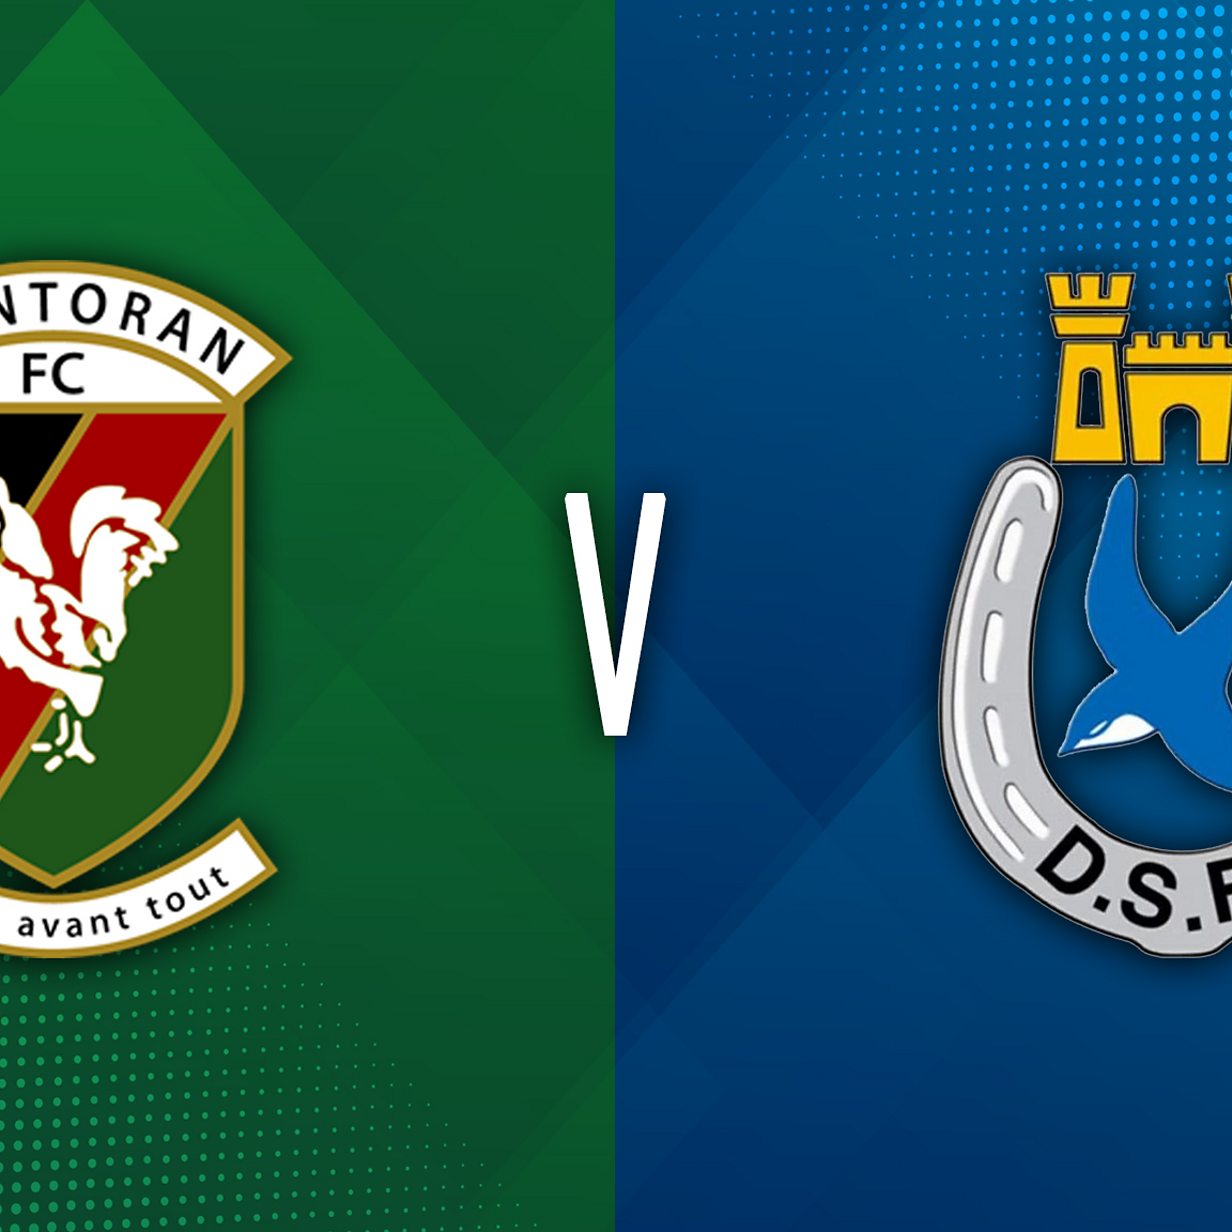 Watch Dungannon Swifts hold Glentoran to a stalemate